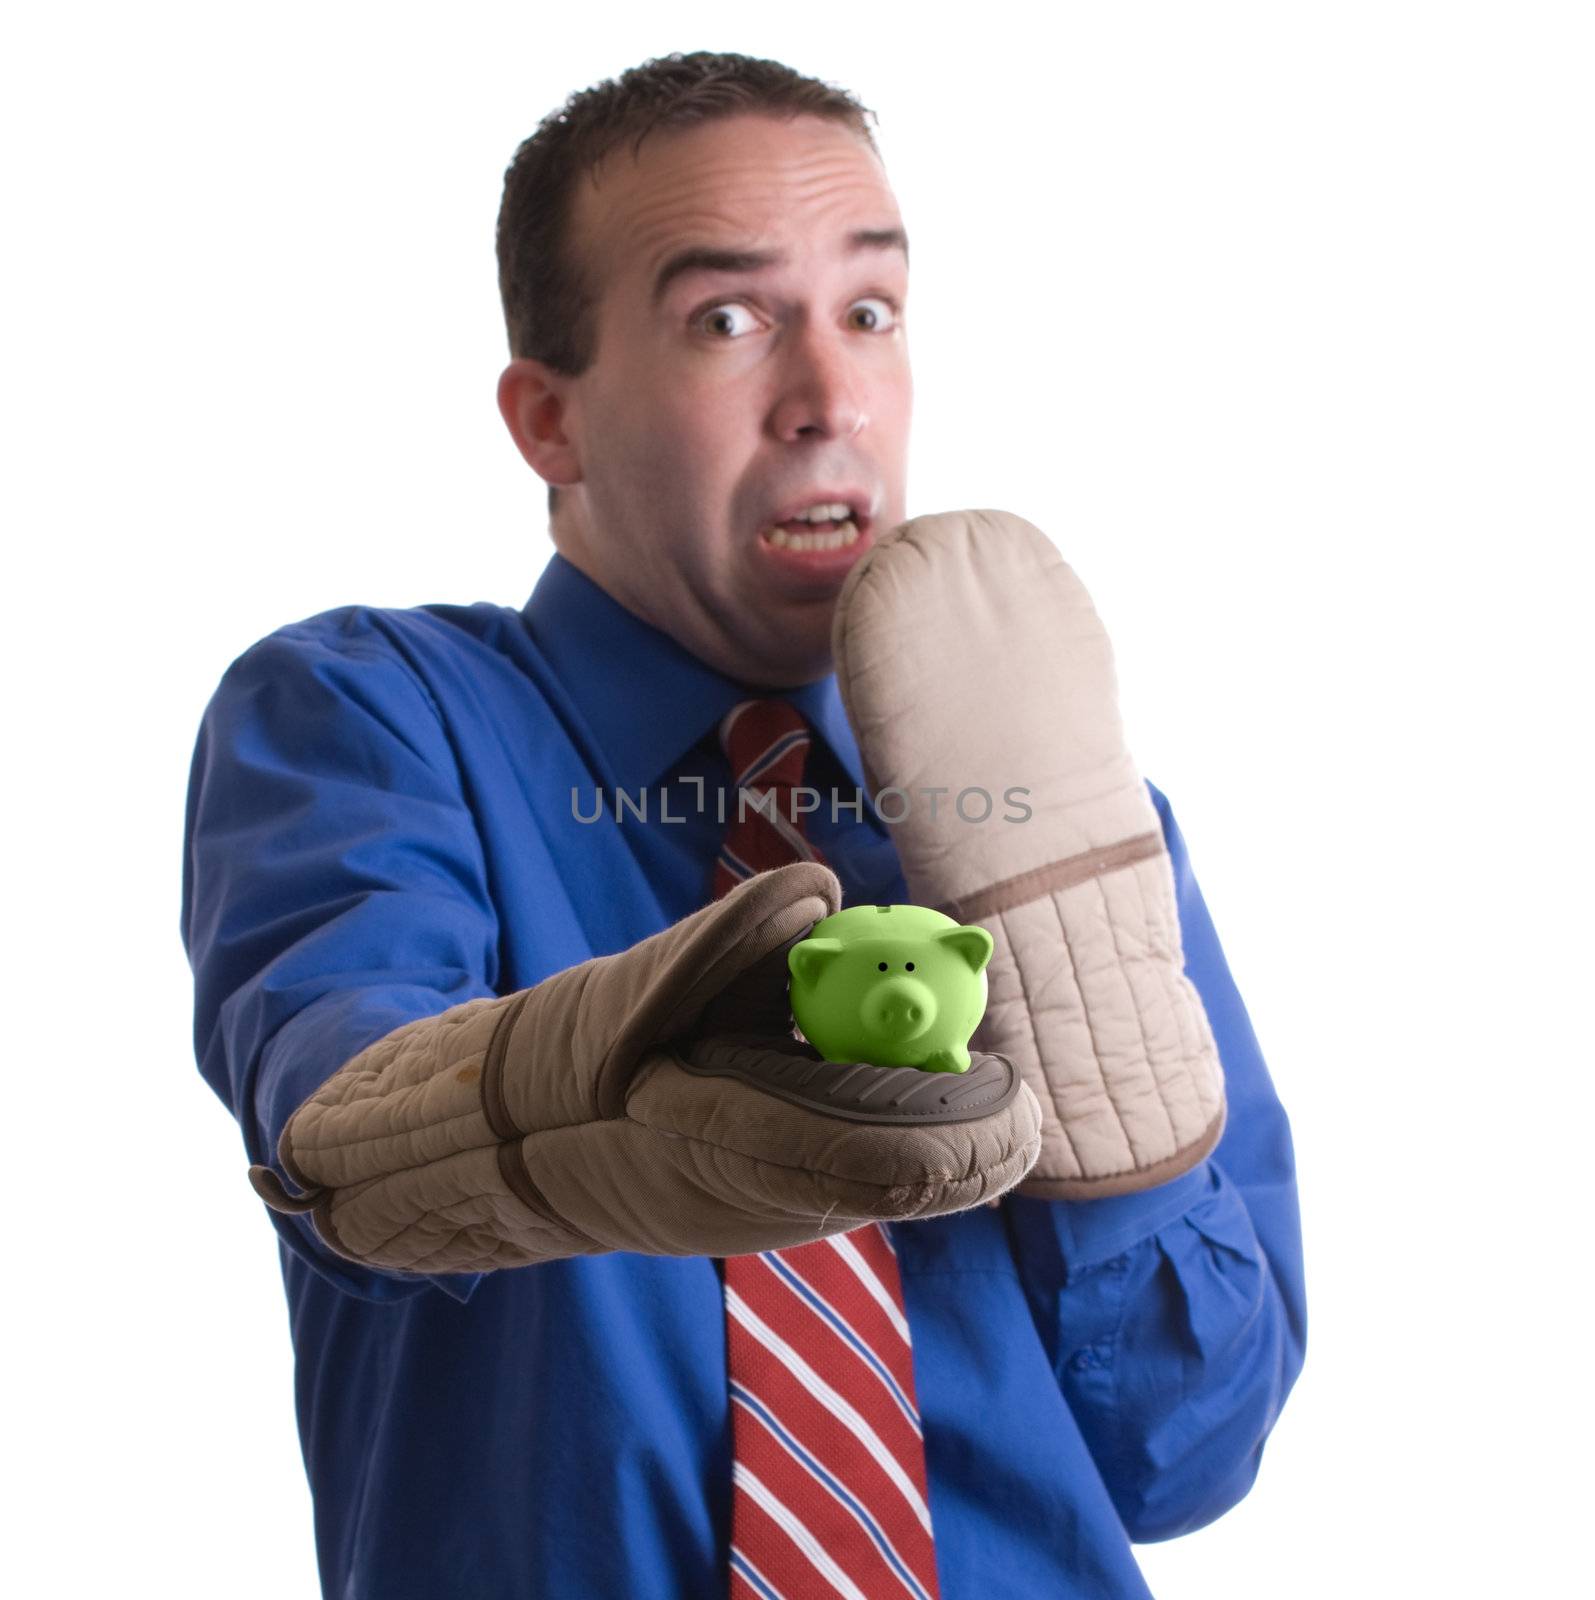 Concept image a risky investment featuring a businessman holding a small piggy bank with oven mitts, isolated against a white background